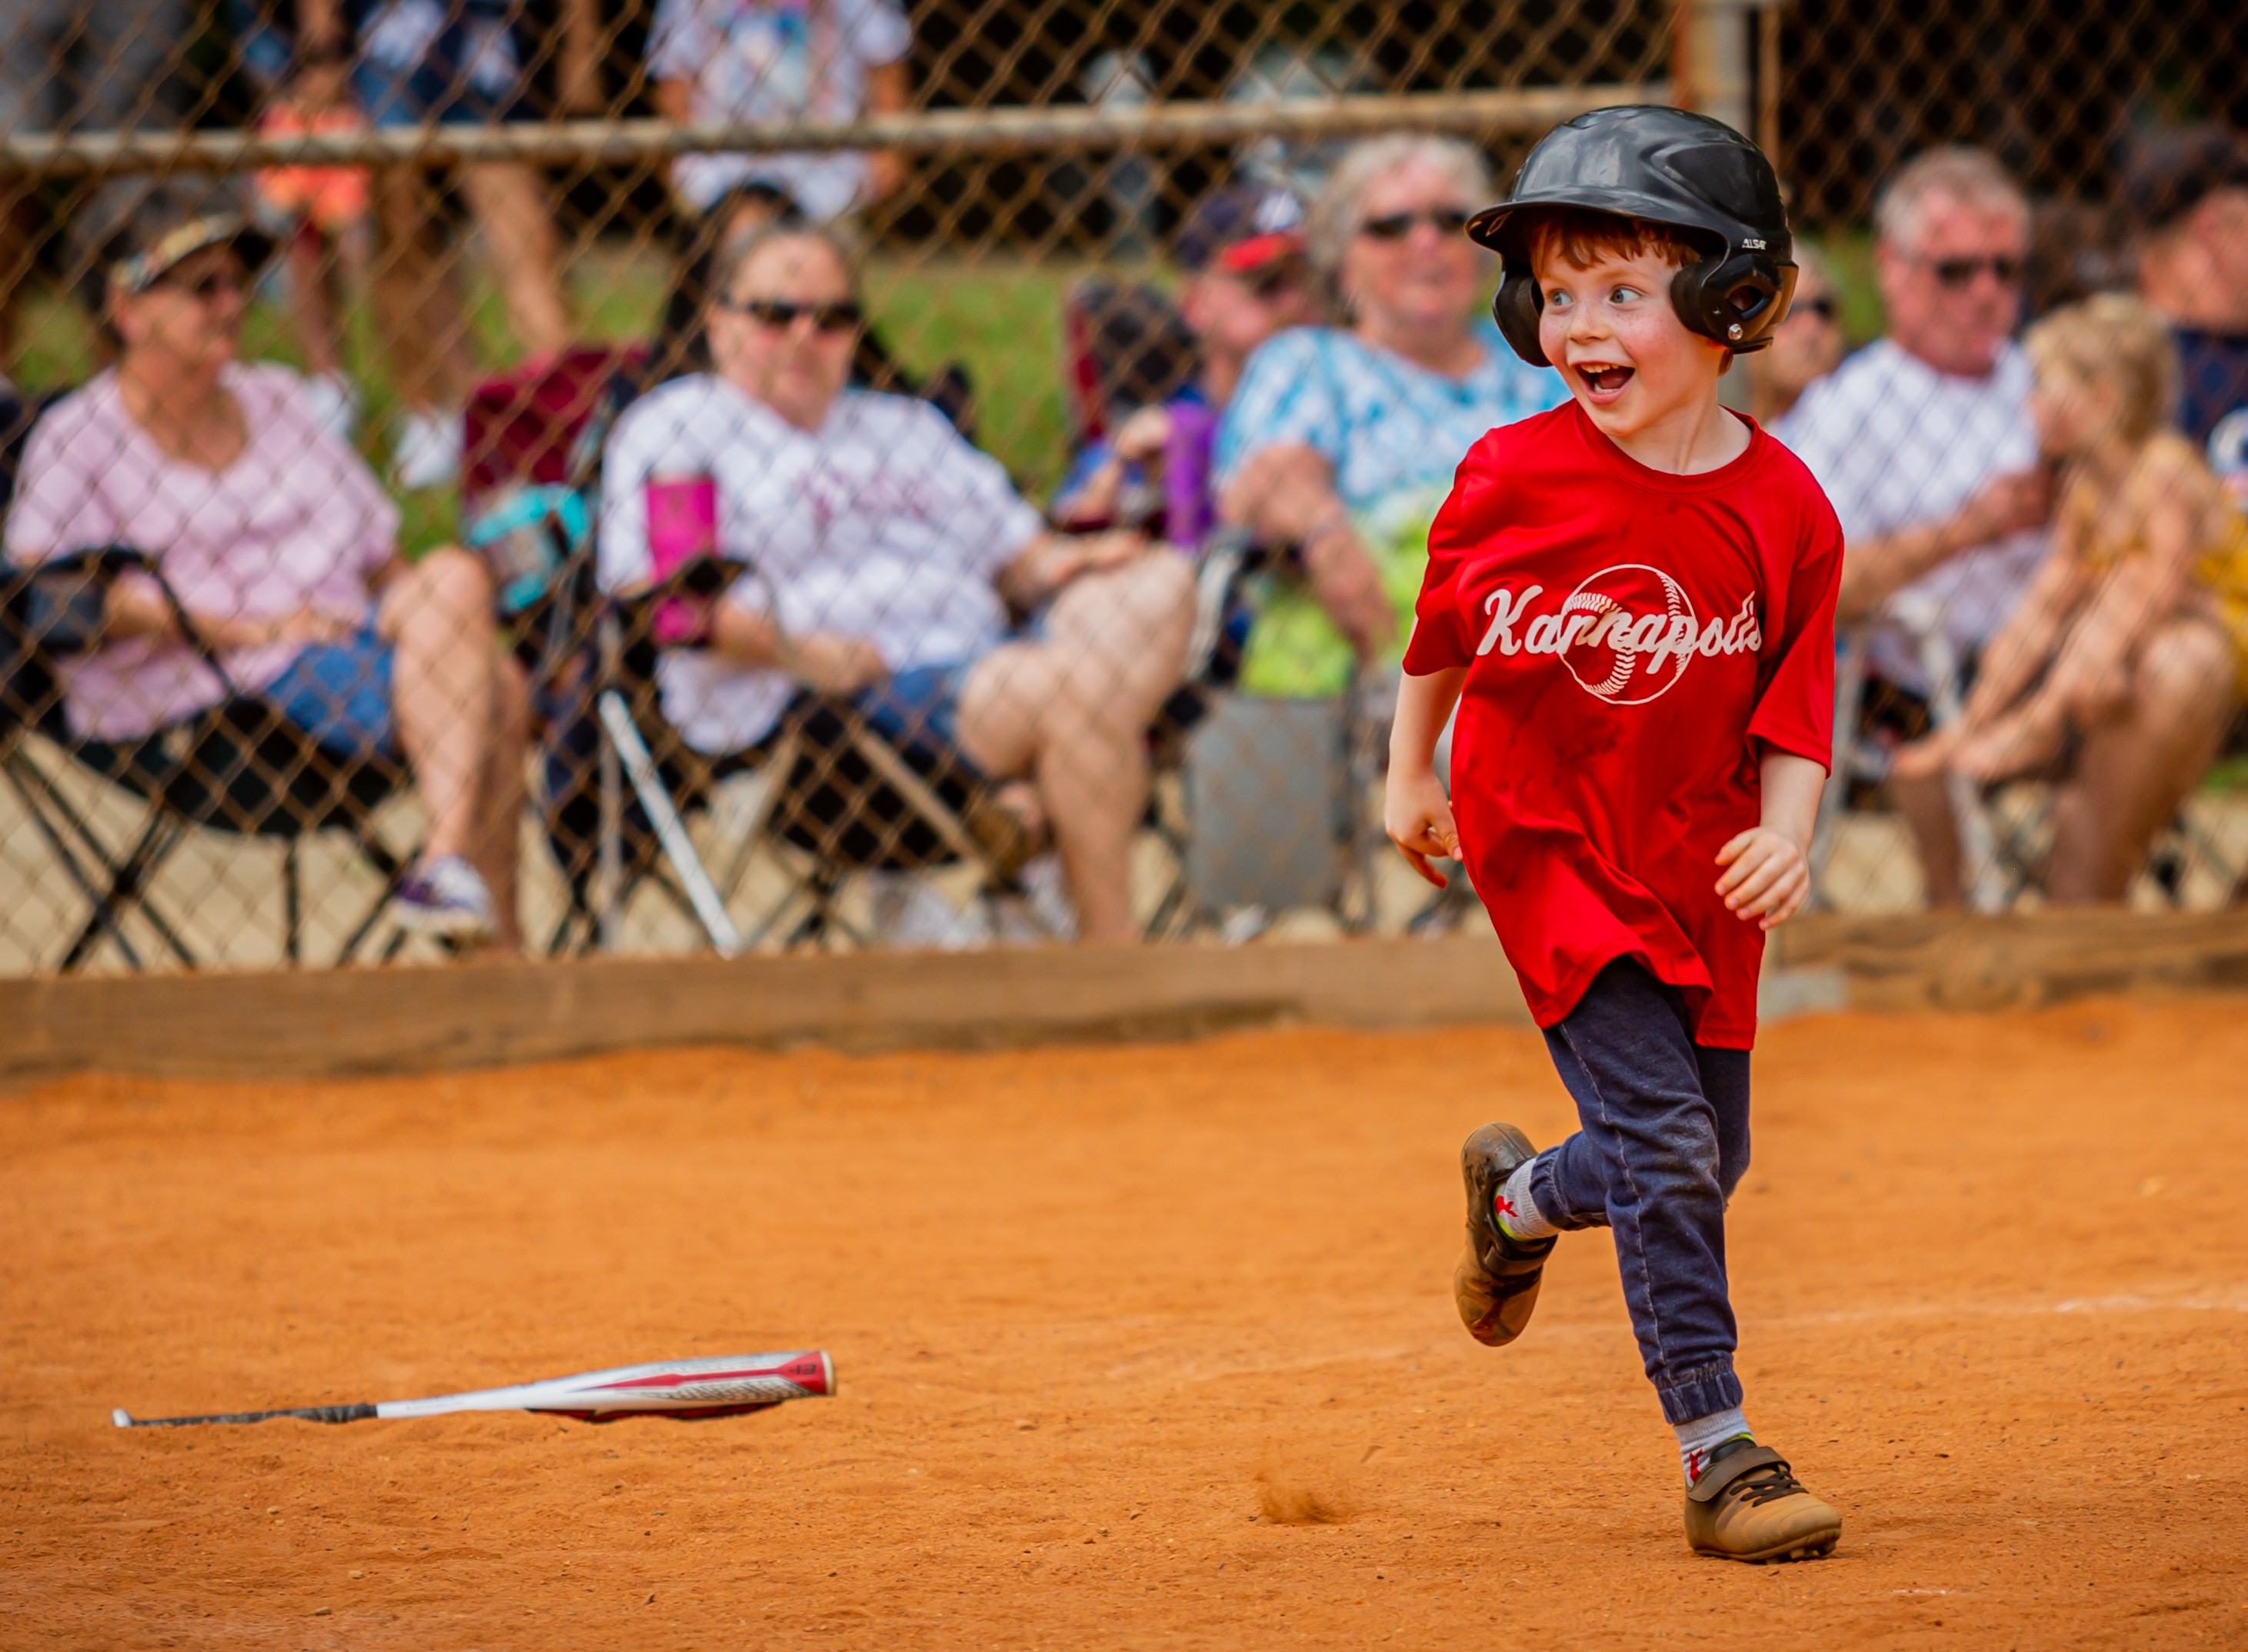 tball boy running to first base